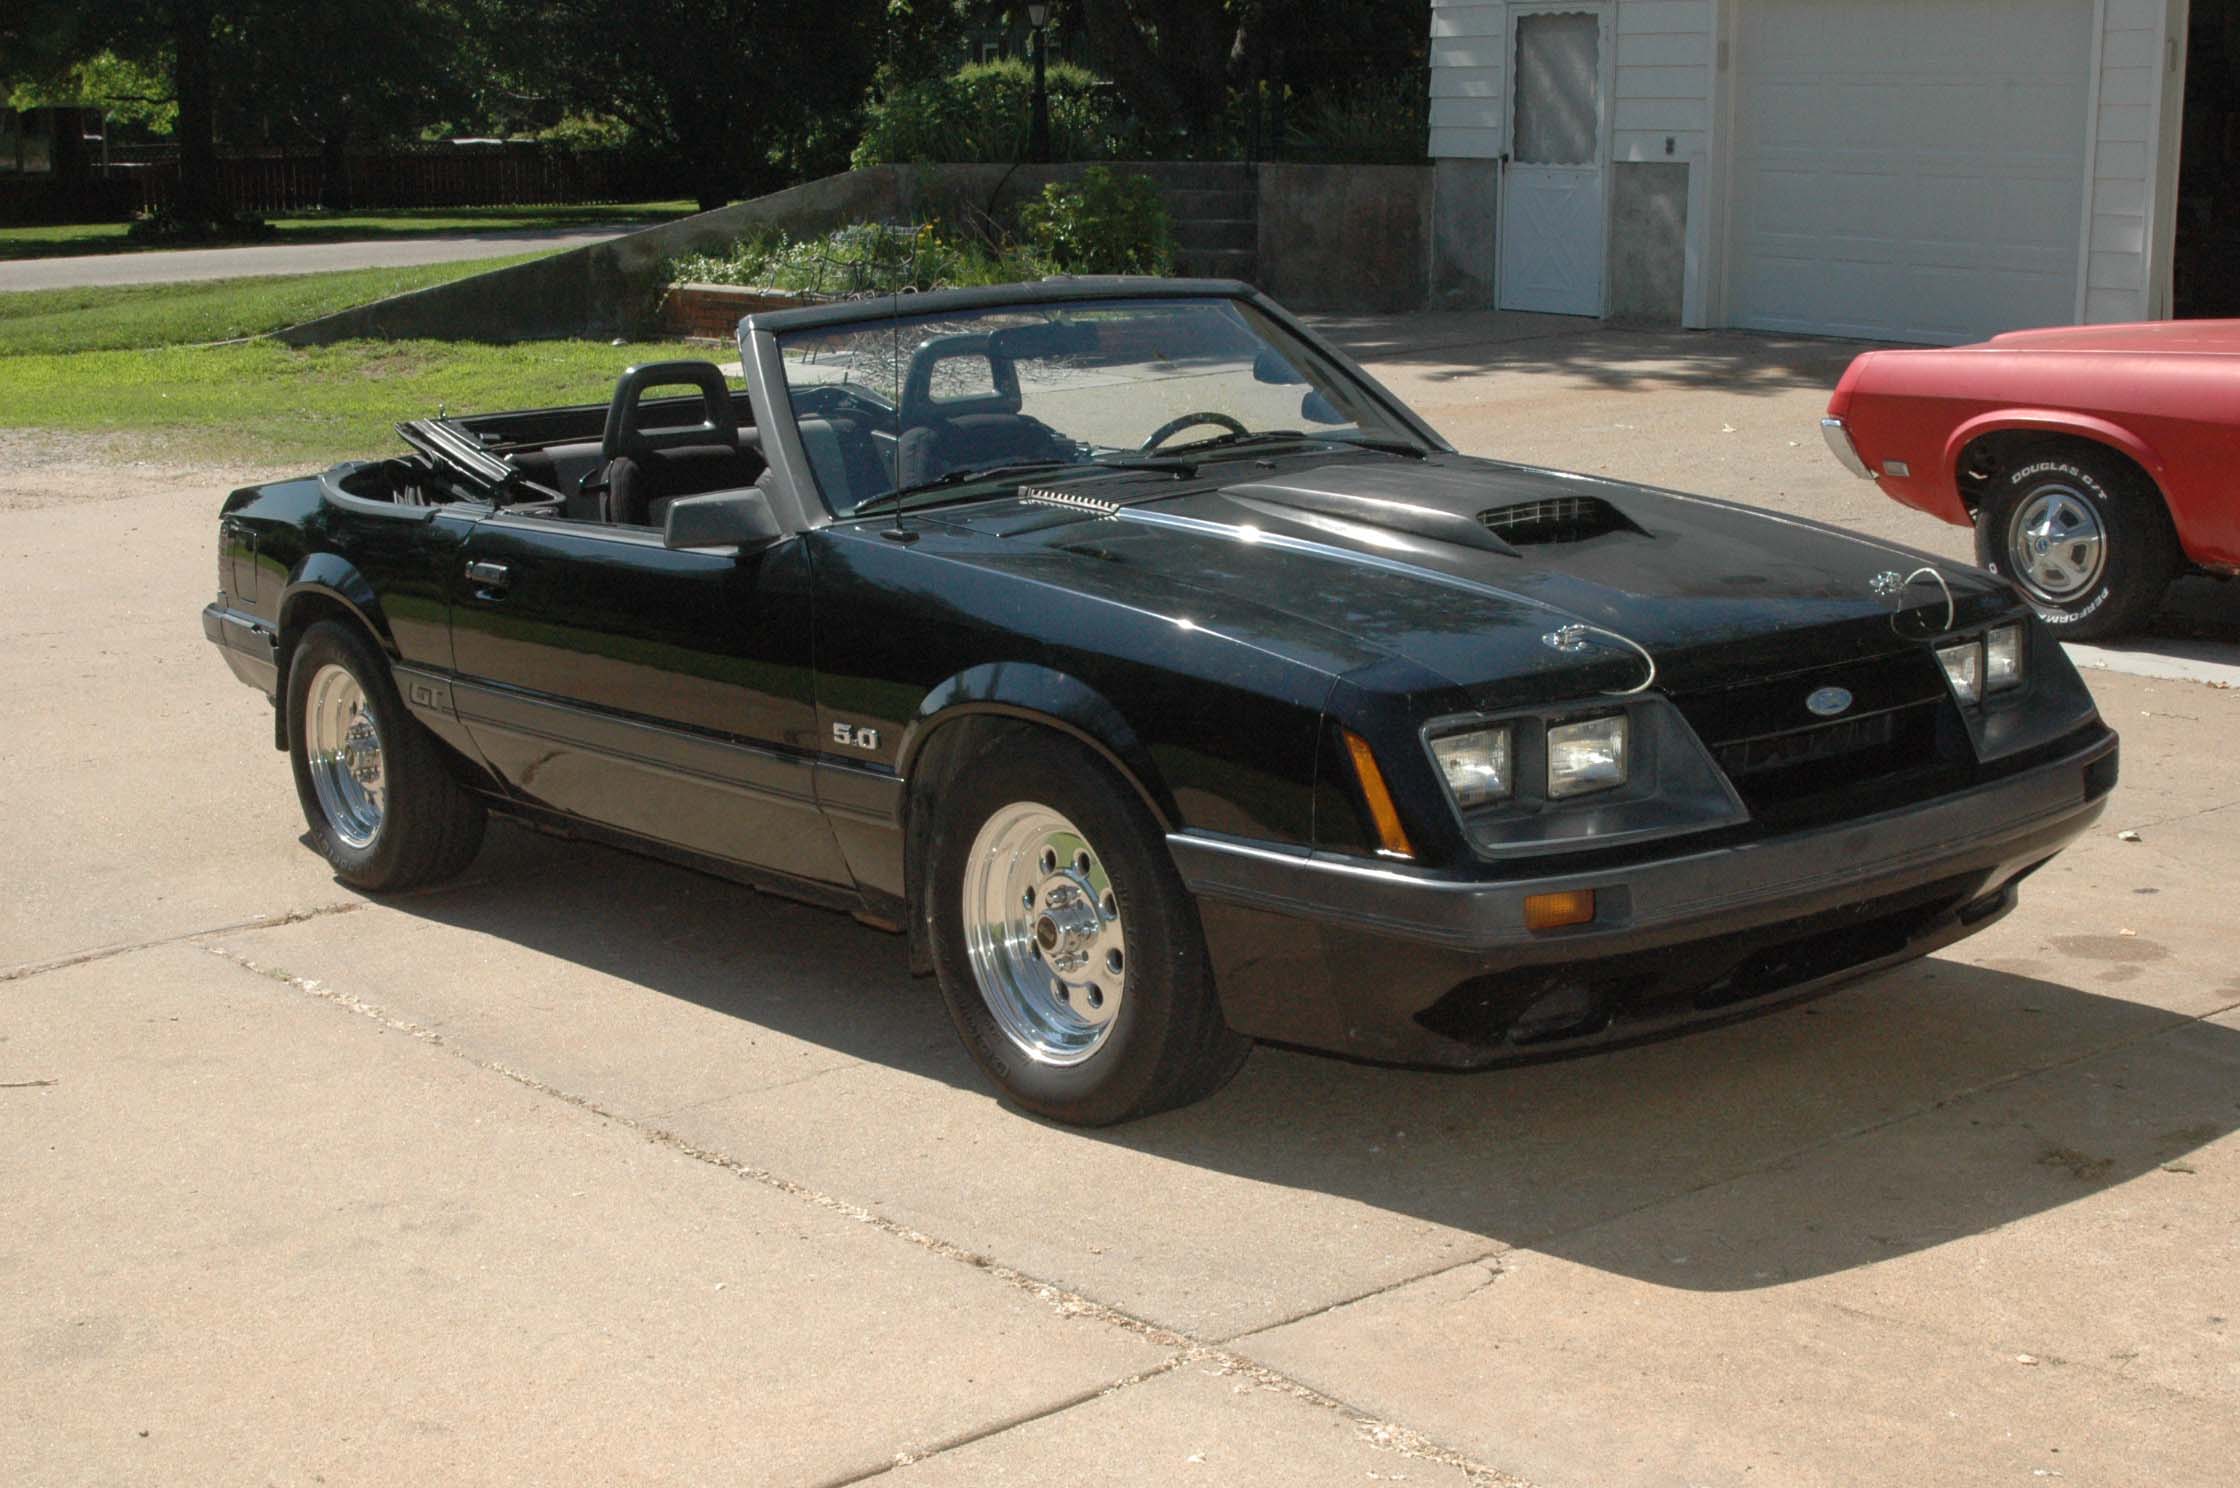 ford mustang gt convertible here is a photo album of my wife s 85 gt ...